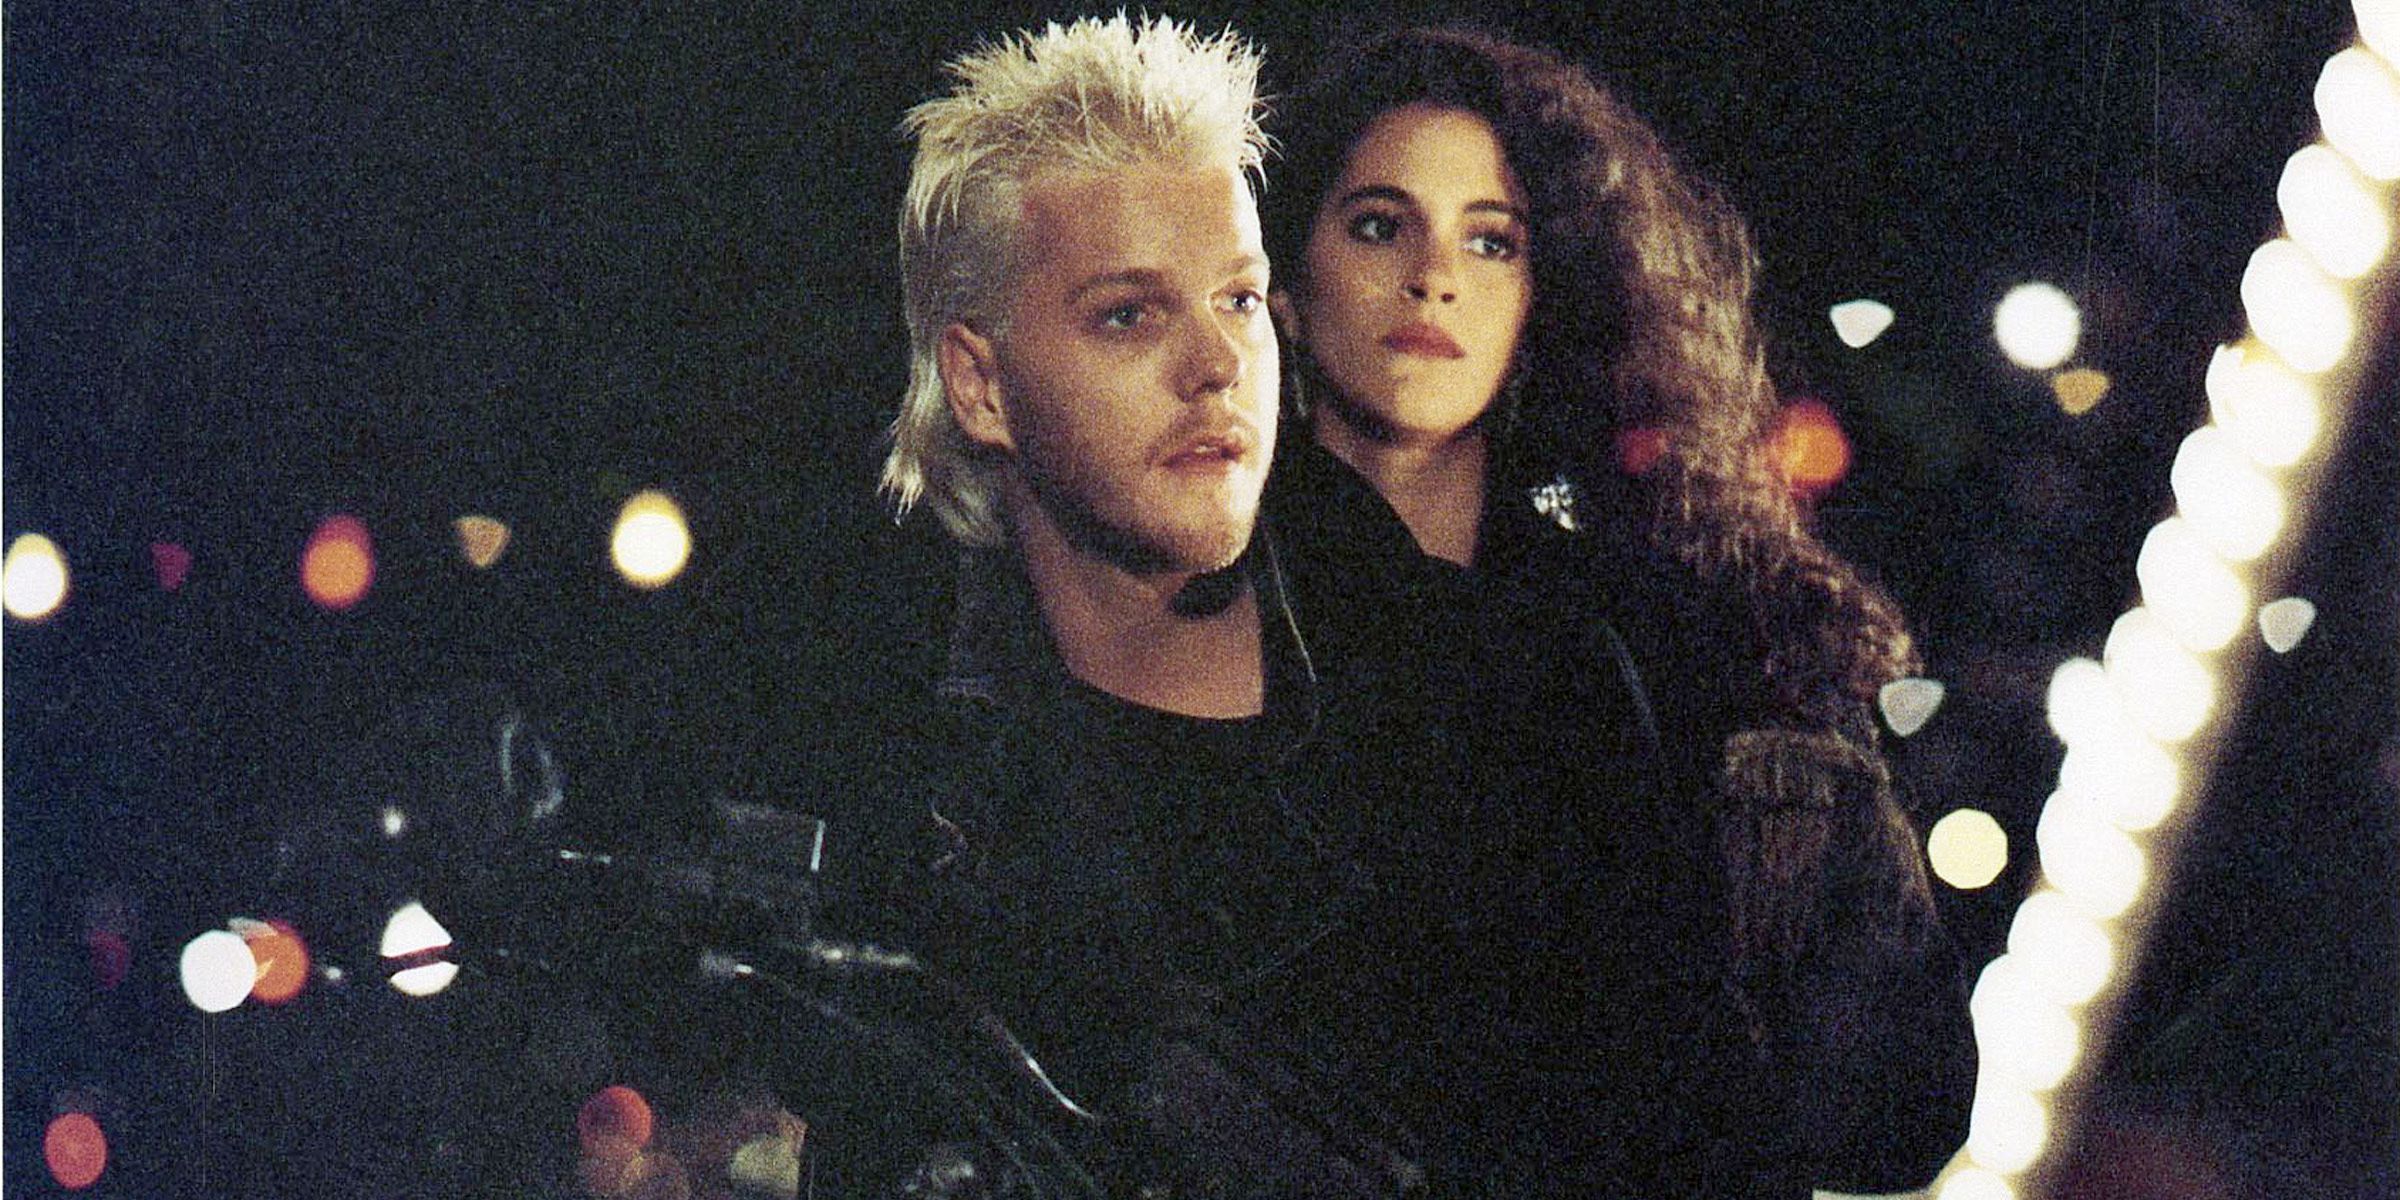 Kiefer and Jami on a bike in The Lost Boys 